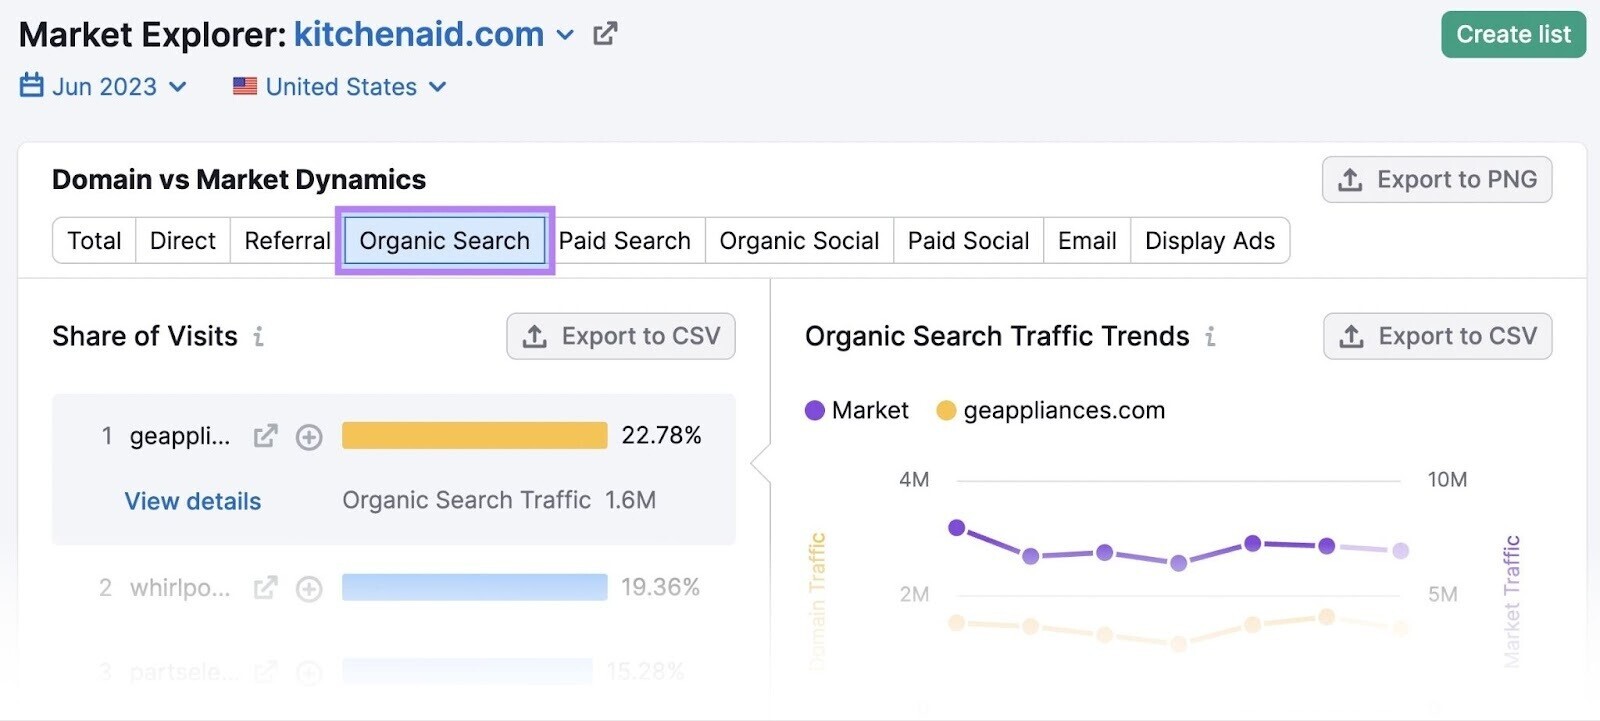 “Organic Search” section in Market Explorer